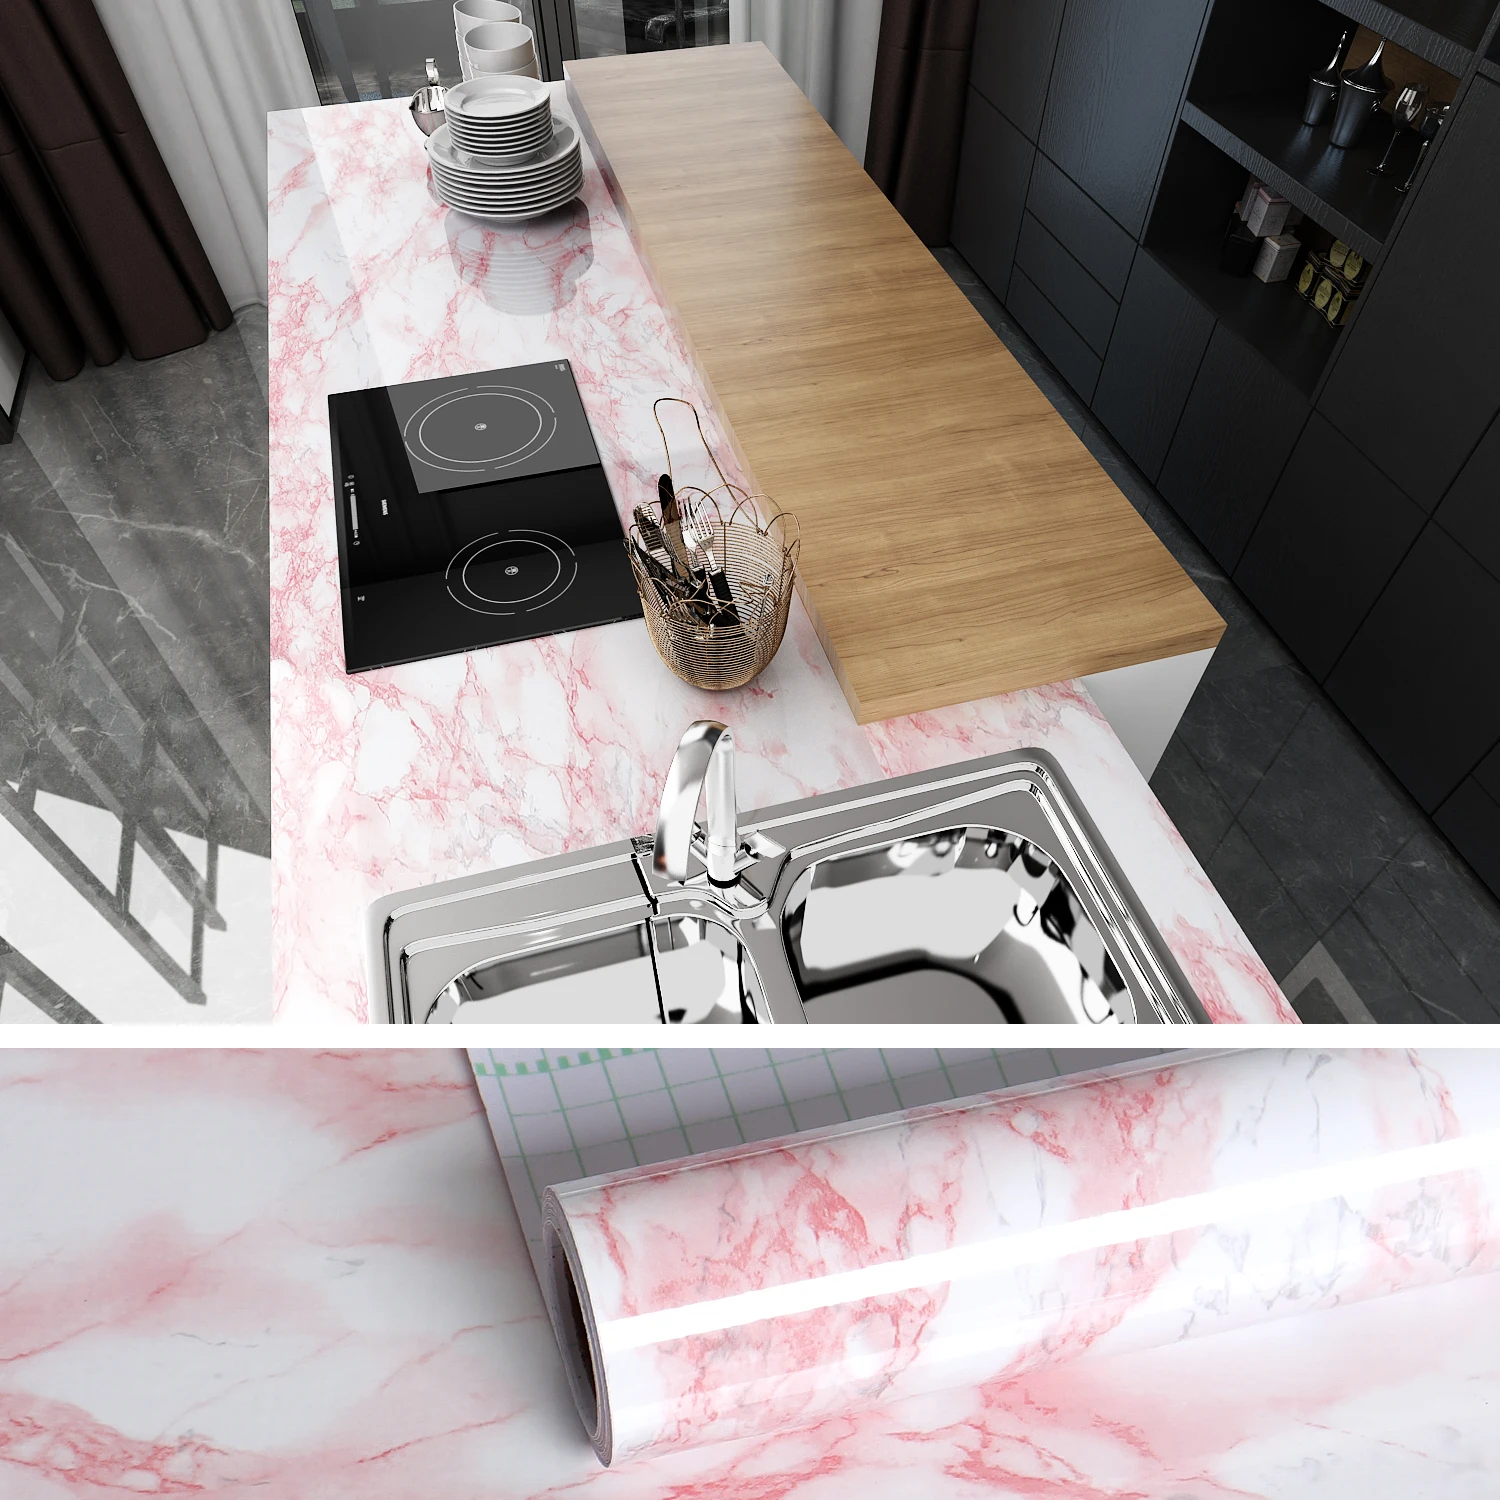 Pink Marble Wallpapers Stick and Peel Stickers Self Adhesive Removable Waterproof Wall Covering Table Countertop Cabinet Drawer fashion piebald jasper drawer cabinet pulls knobs dresser cupboard bathroom door brass handle wall hanging hooks furniture decor